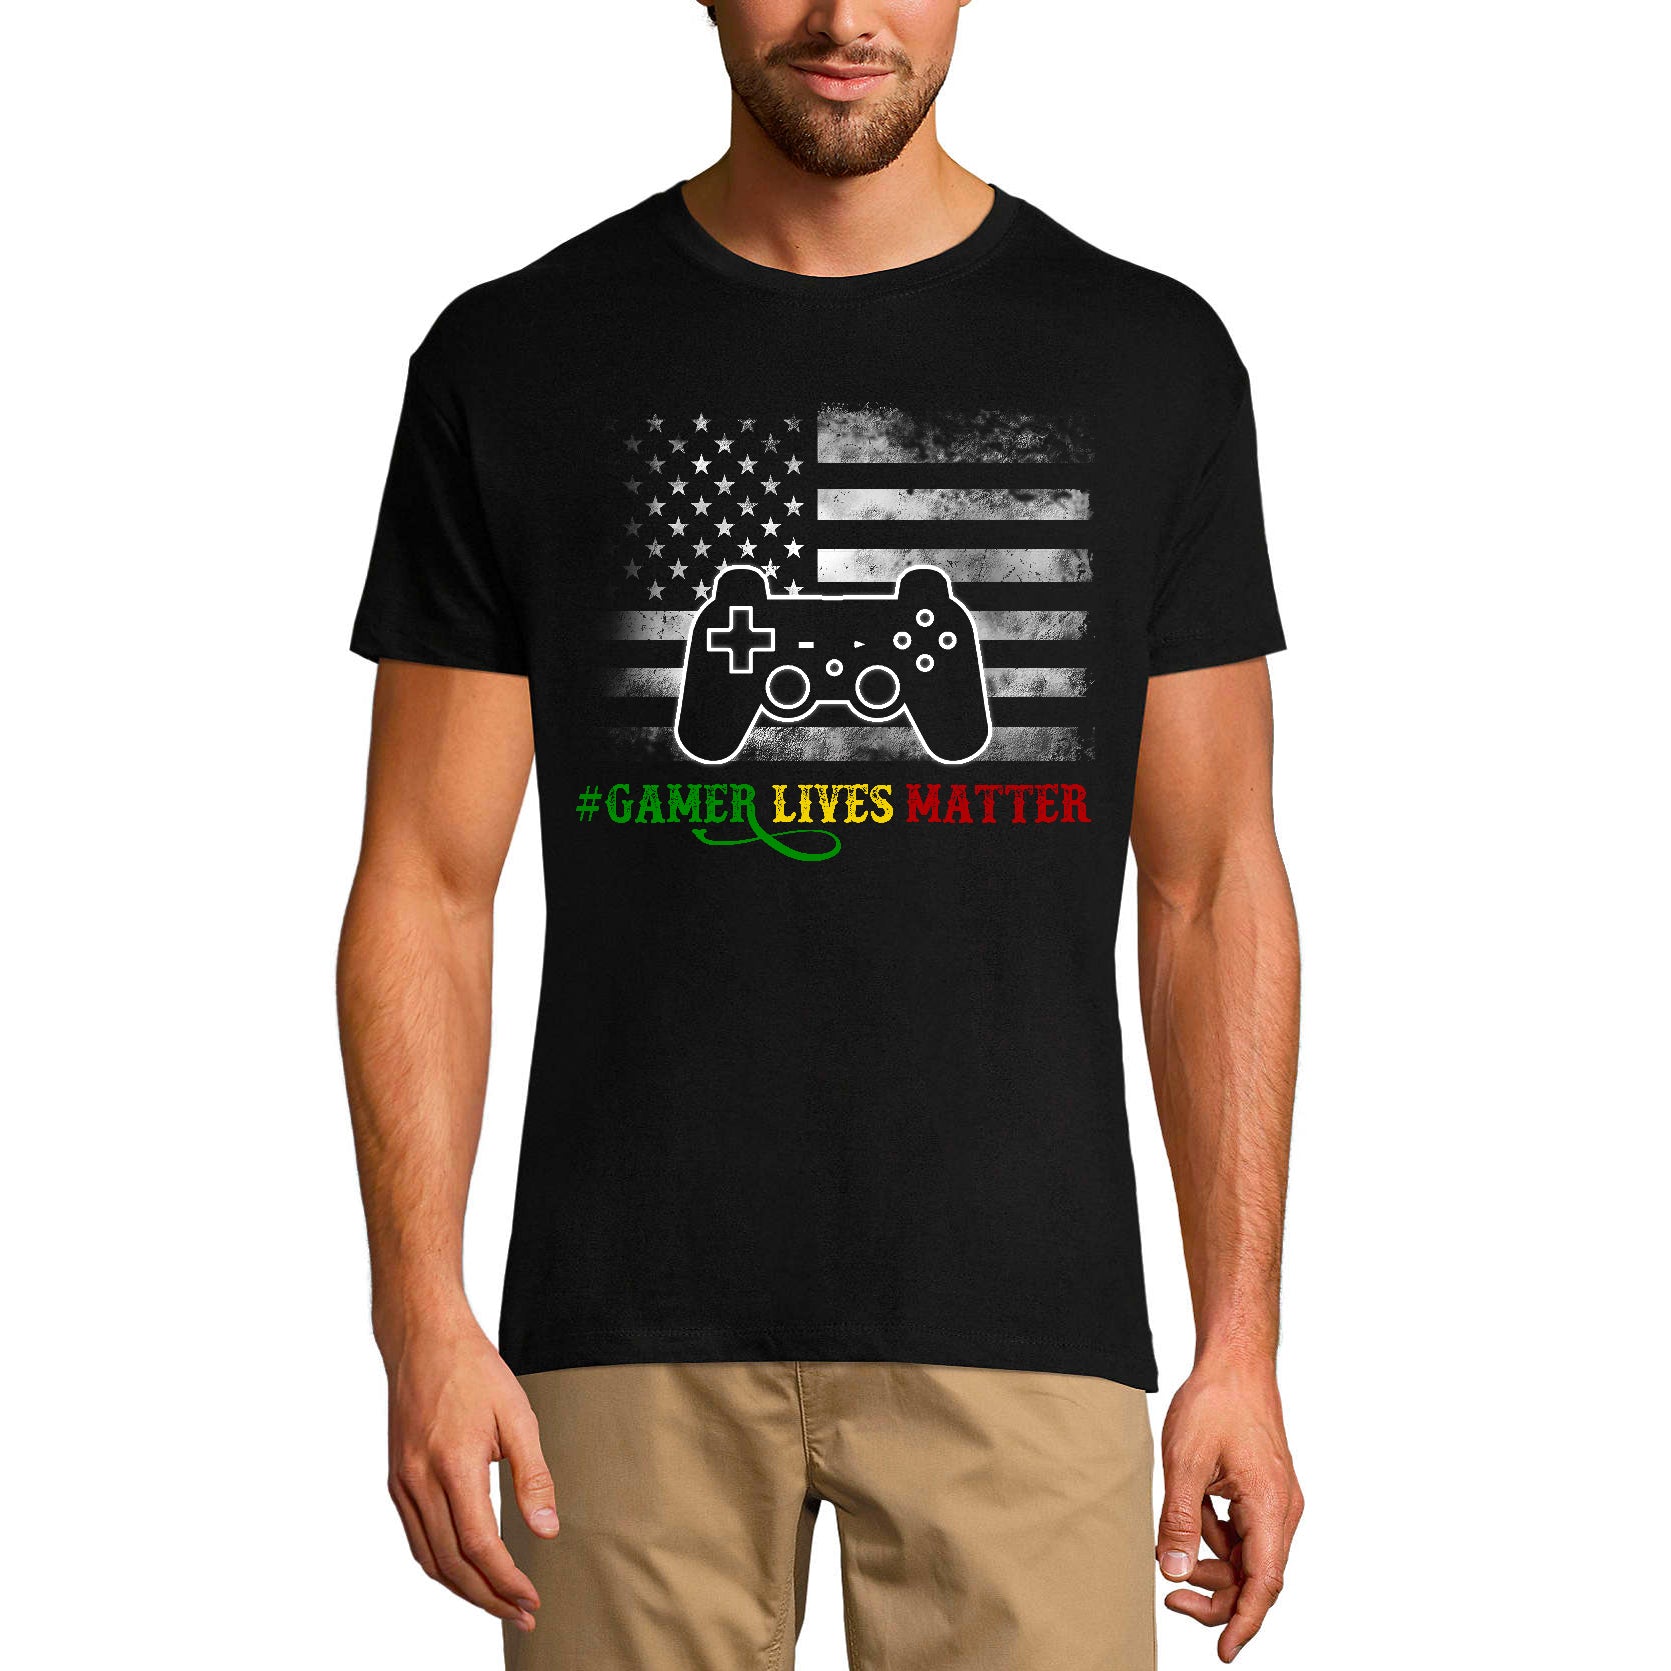 ULTRABASIC Men's T-Shirt Gamer Lives Matter - American Flag - Gaming Apparel gamer lives matter quote dad gamer i paused my game alien player ufo playstation tee shirt clothes gaming apparel gifts super mario nintendo call of duty graphic tshirt video game funny geek gift for the gamer fortnite pubg humor son father birthday